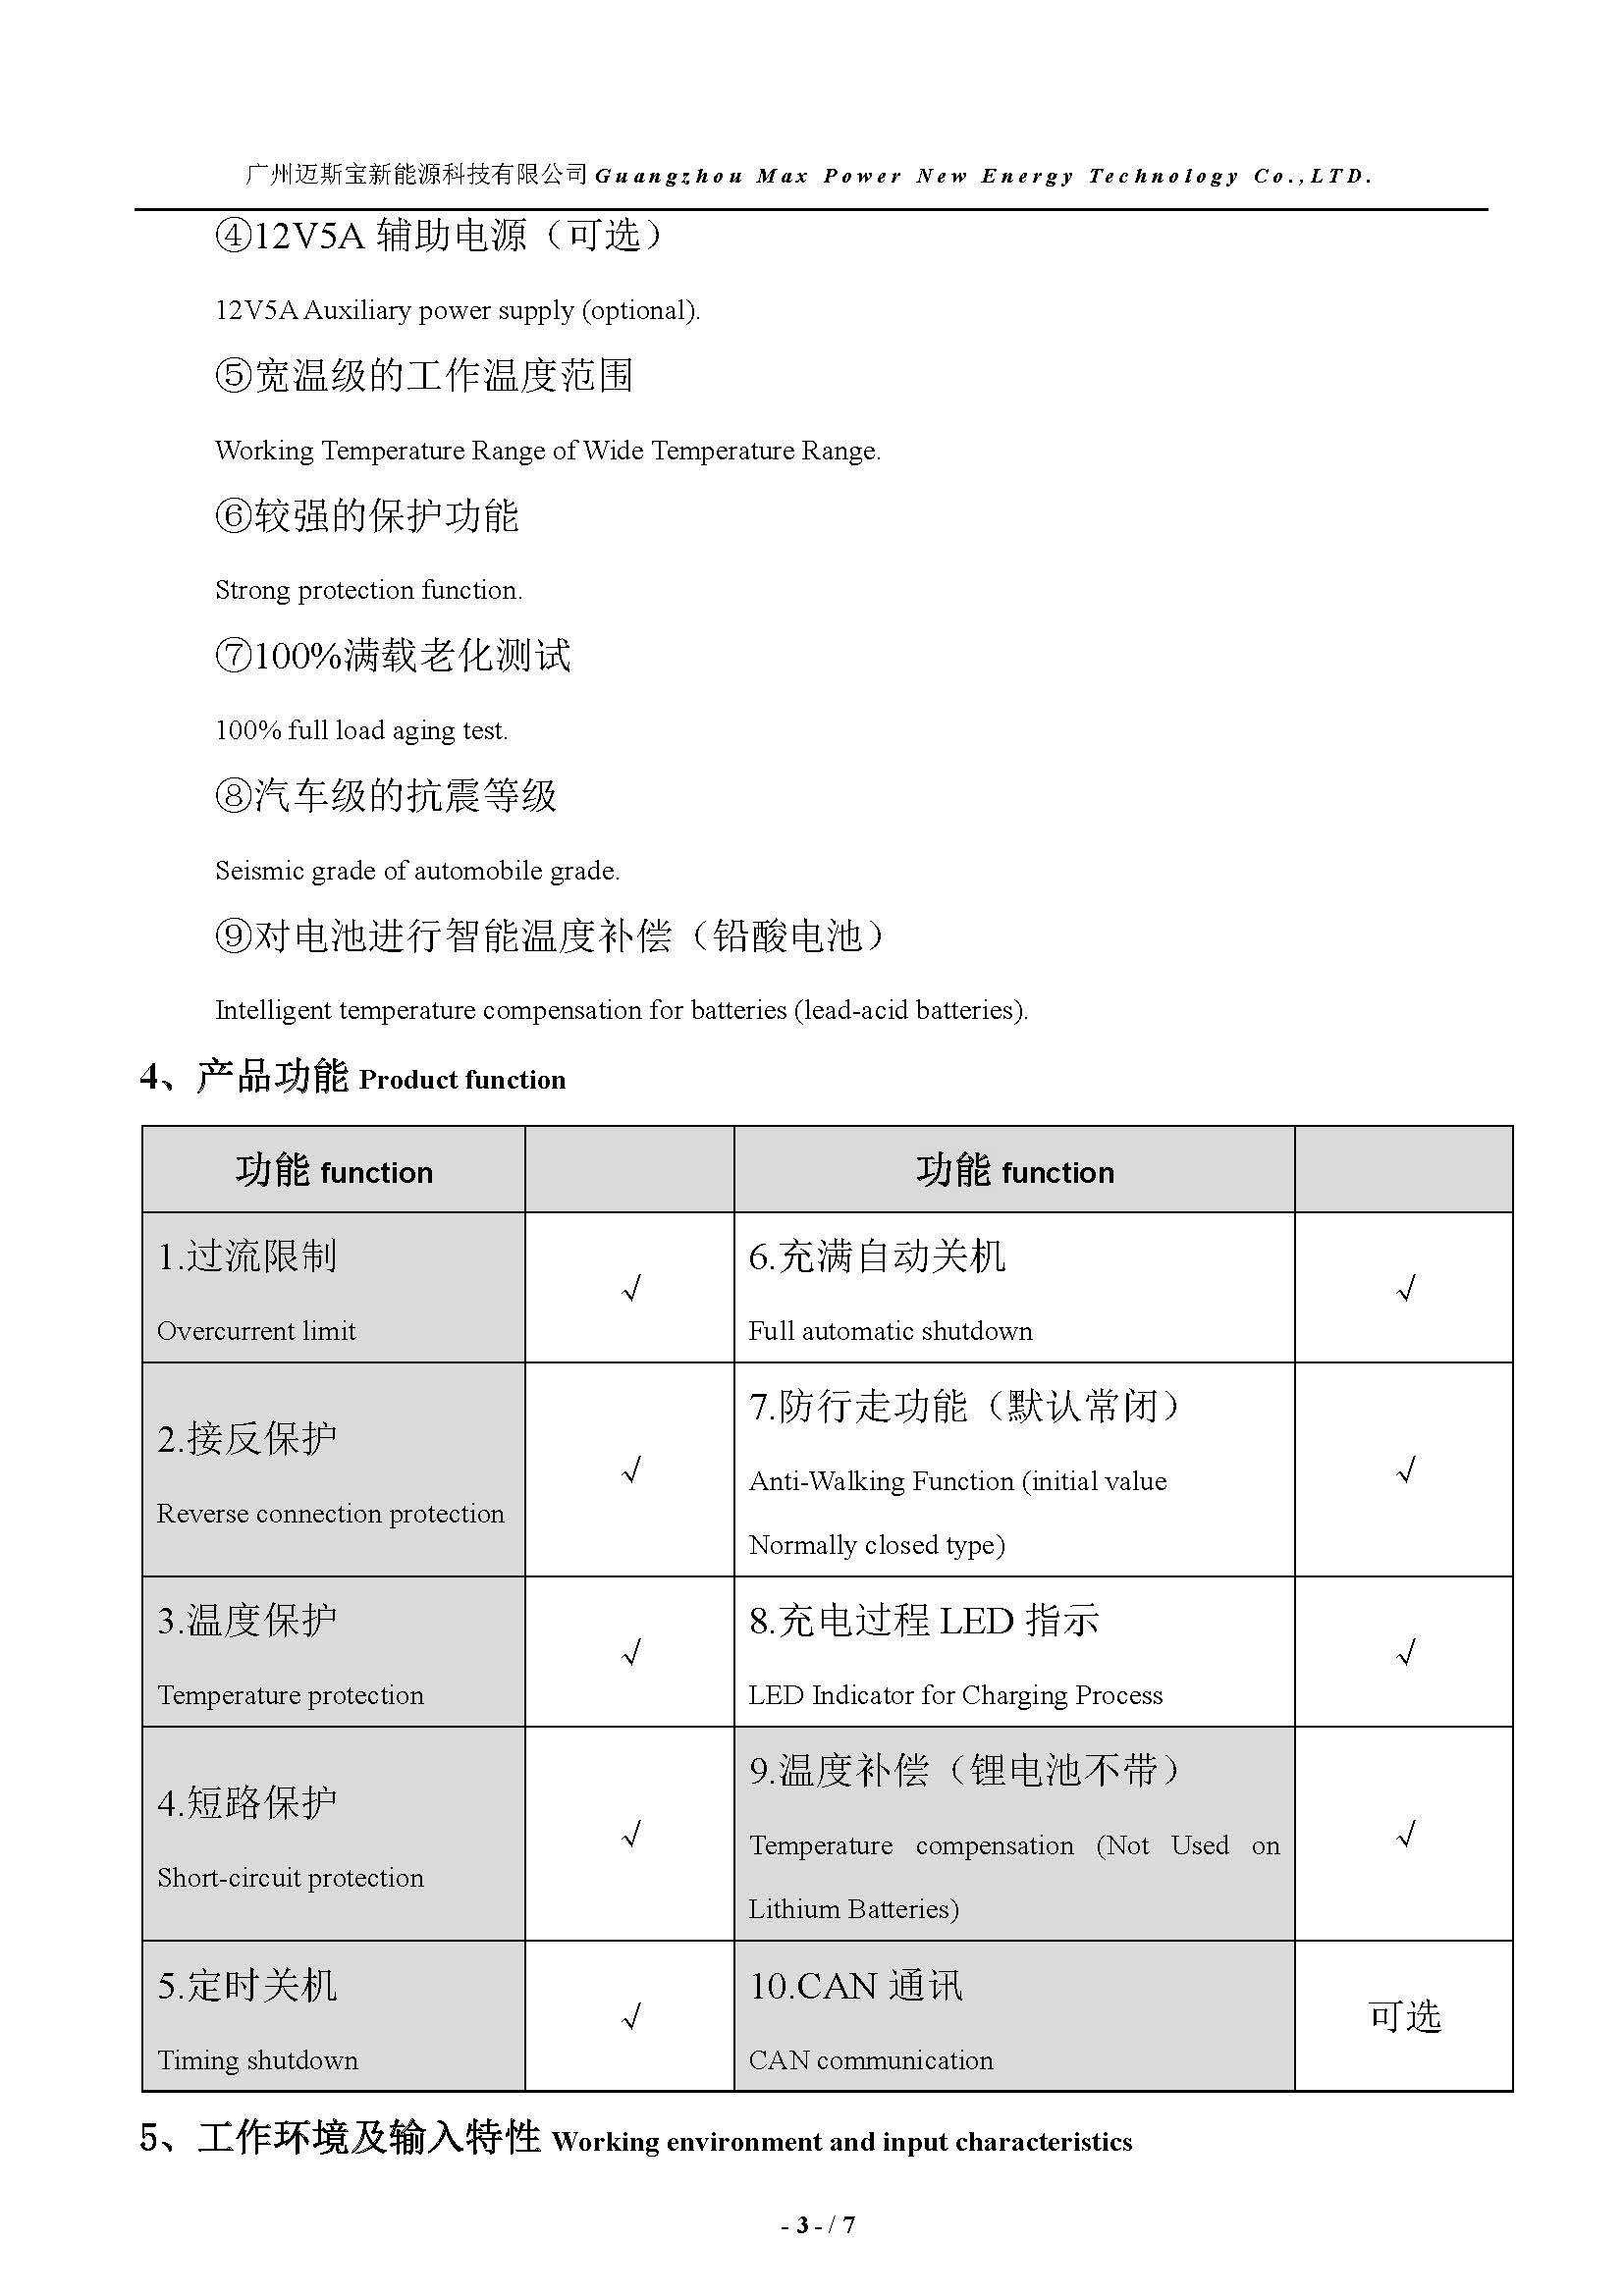 OBC4830_product specification_V1.0_0117_2021_页面_3.jpg